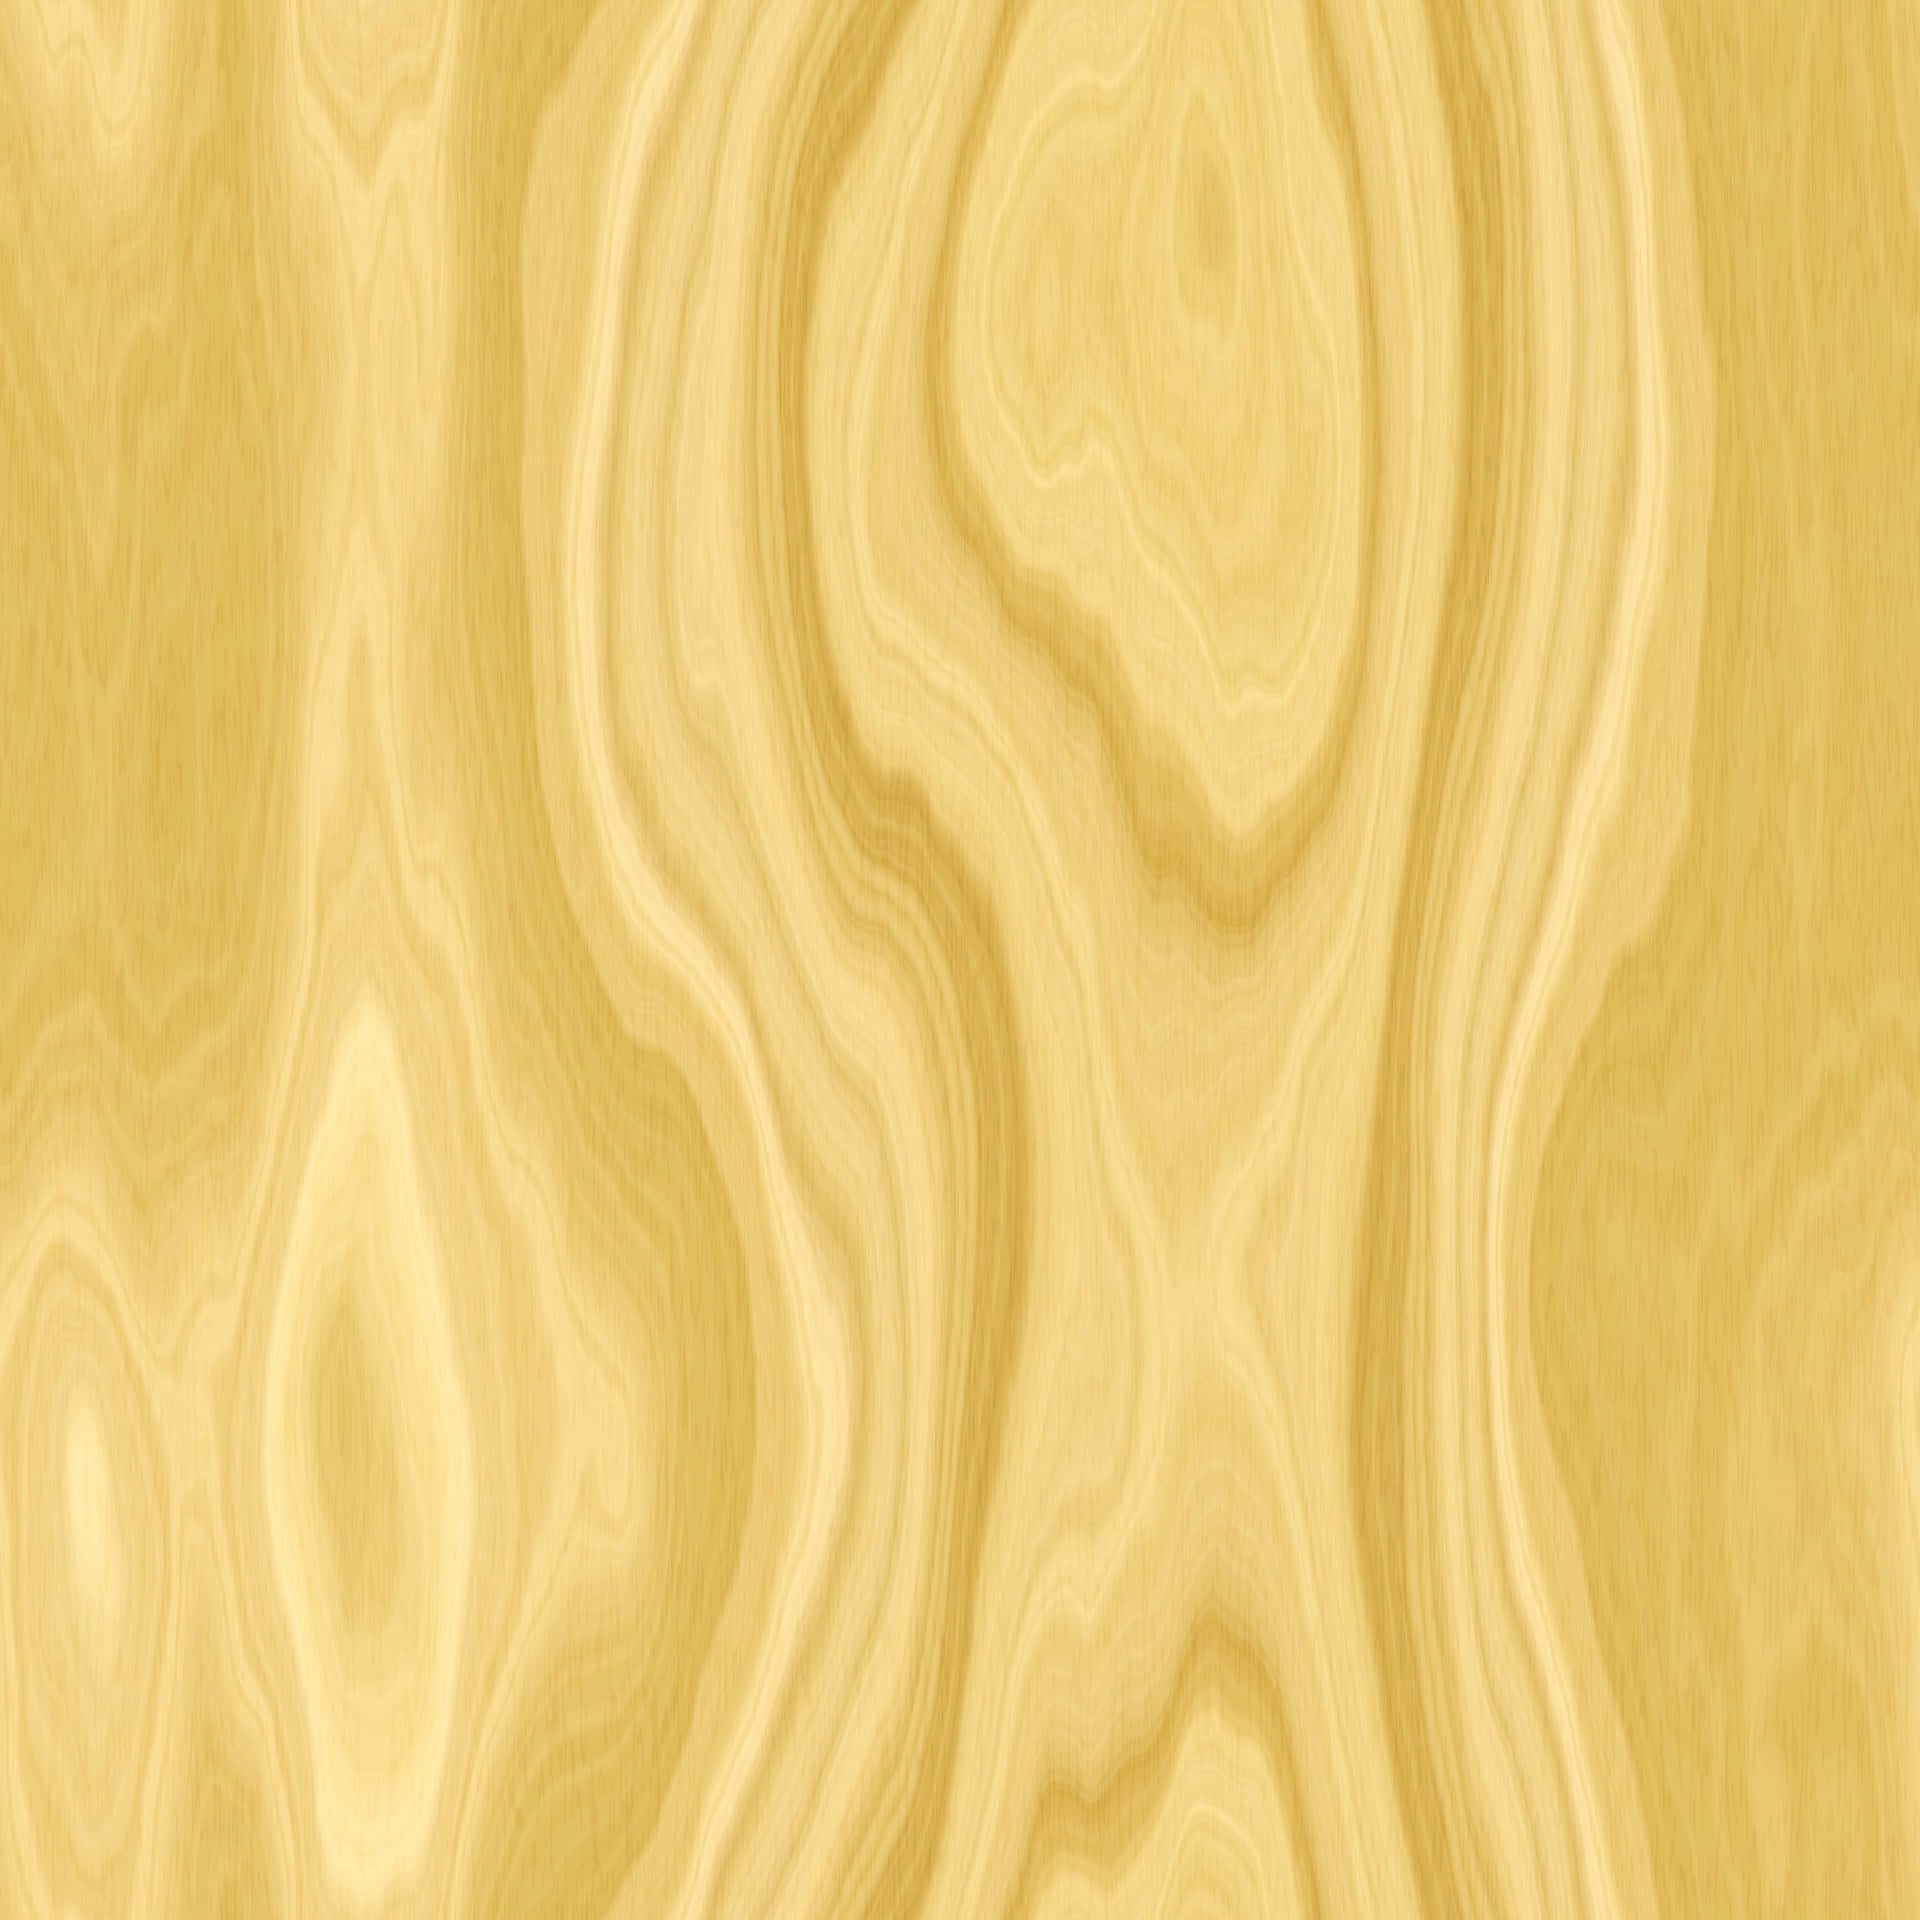 A Wood Texture With A Yellow Color